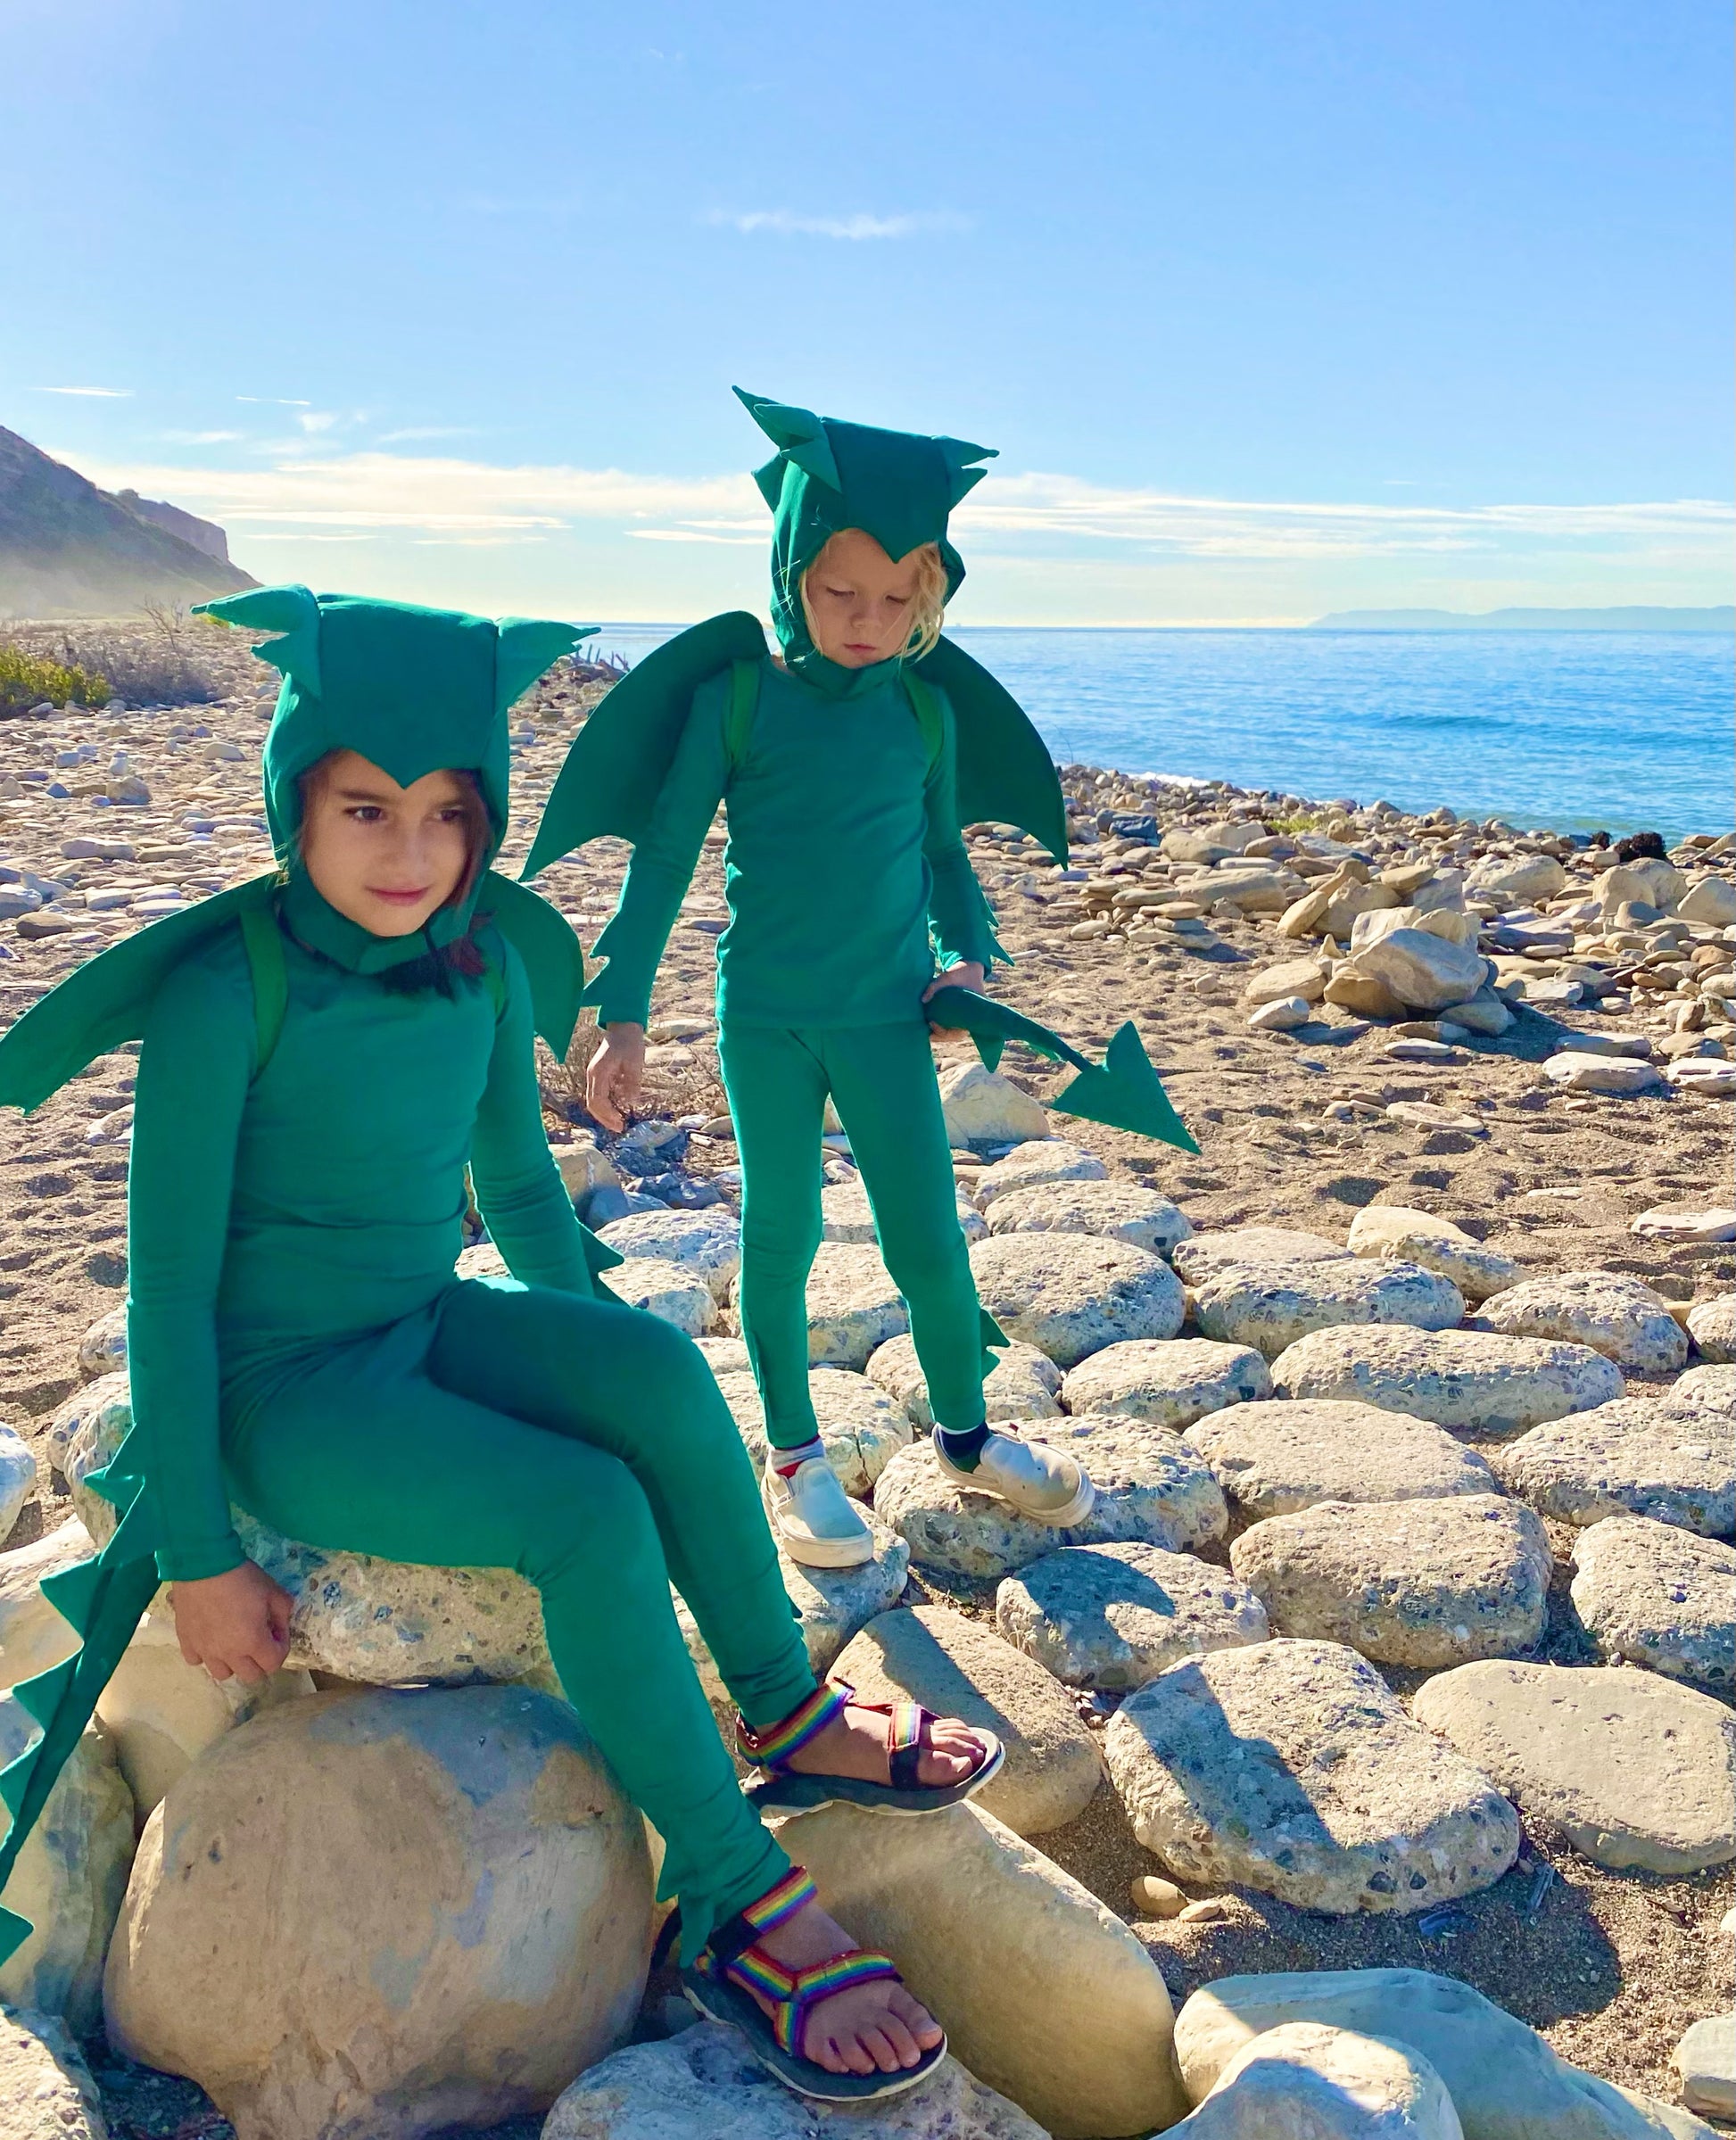 Green Dinosaur or Dragon Costume for Kids. Made with the most eco-friendly upcycled cotton for environmental sustainability. A pajama costume, hat, wings, tail, and cozy pajamas. Open ended toy for kids and toddlers, pretend play. 